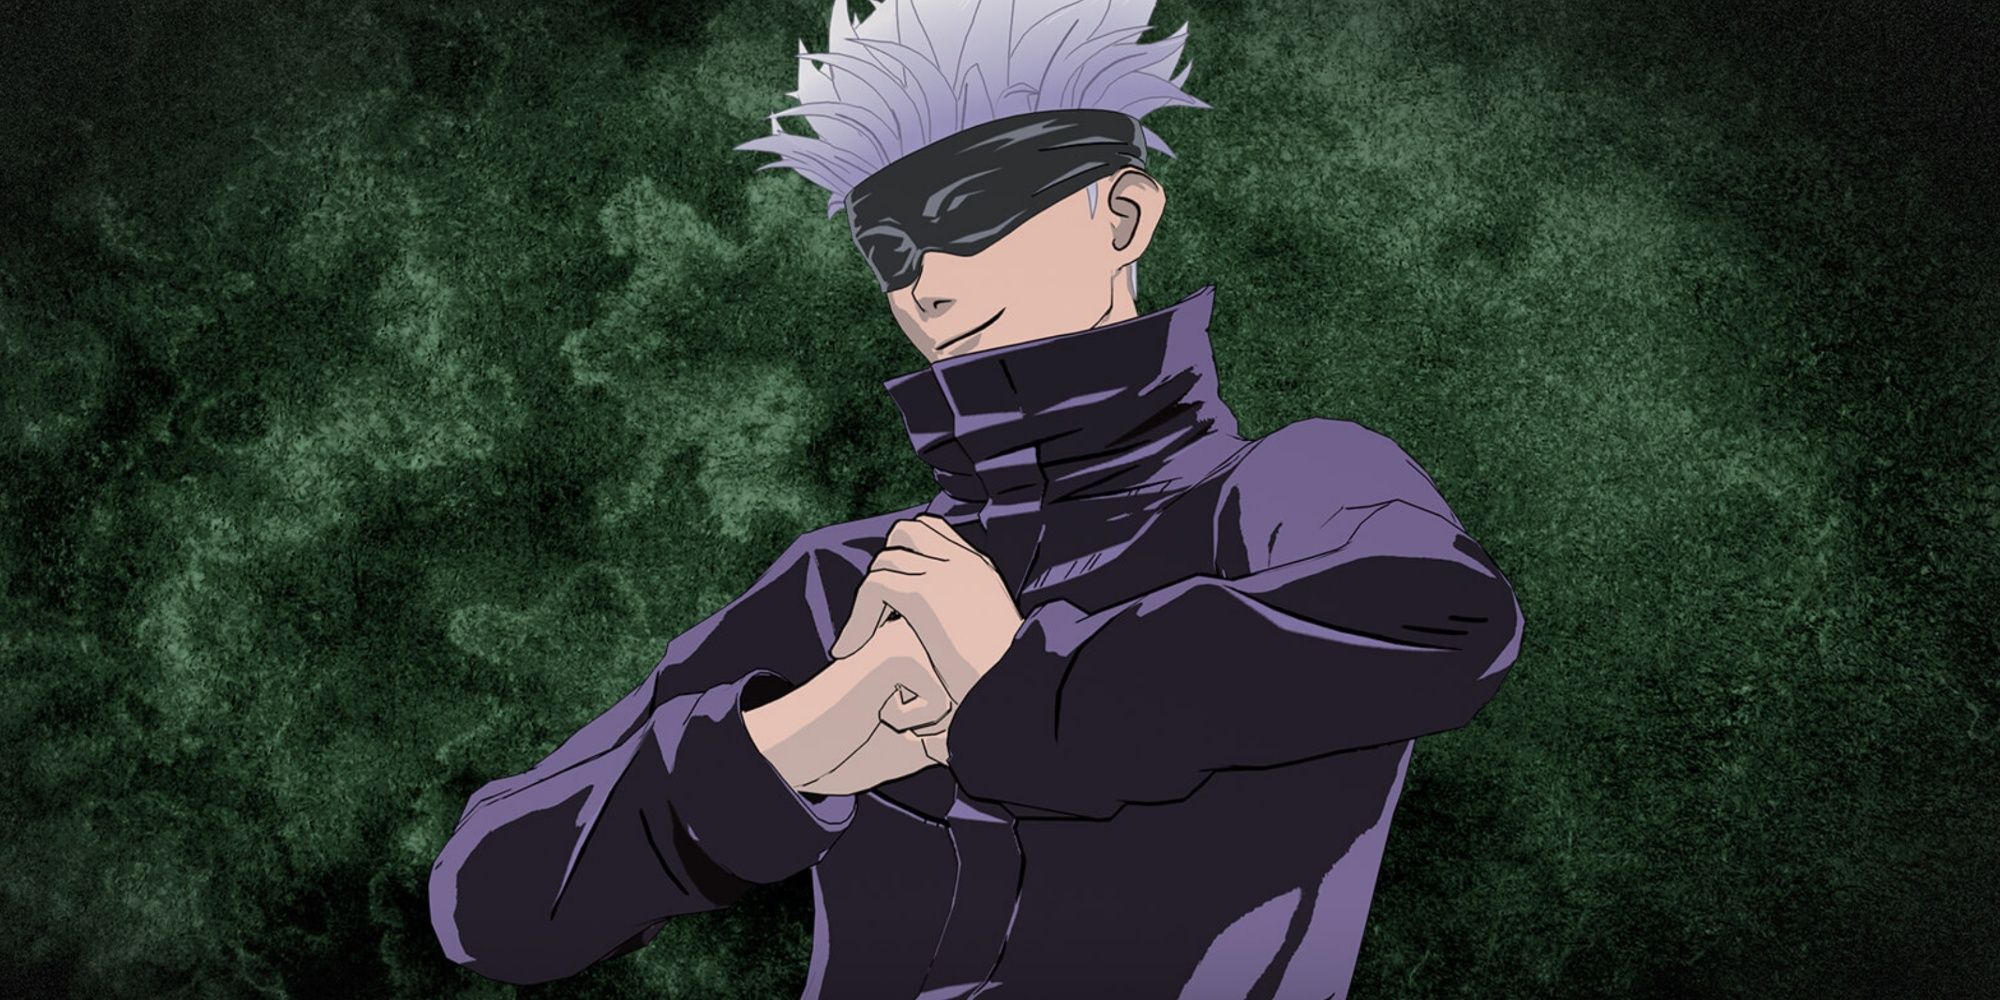 Why does Gojo cover his eyes in Jujutsu Kaisen?